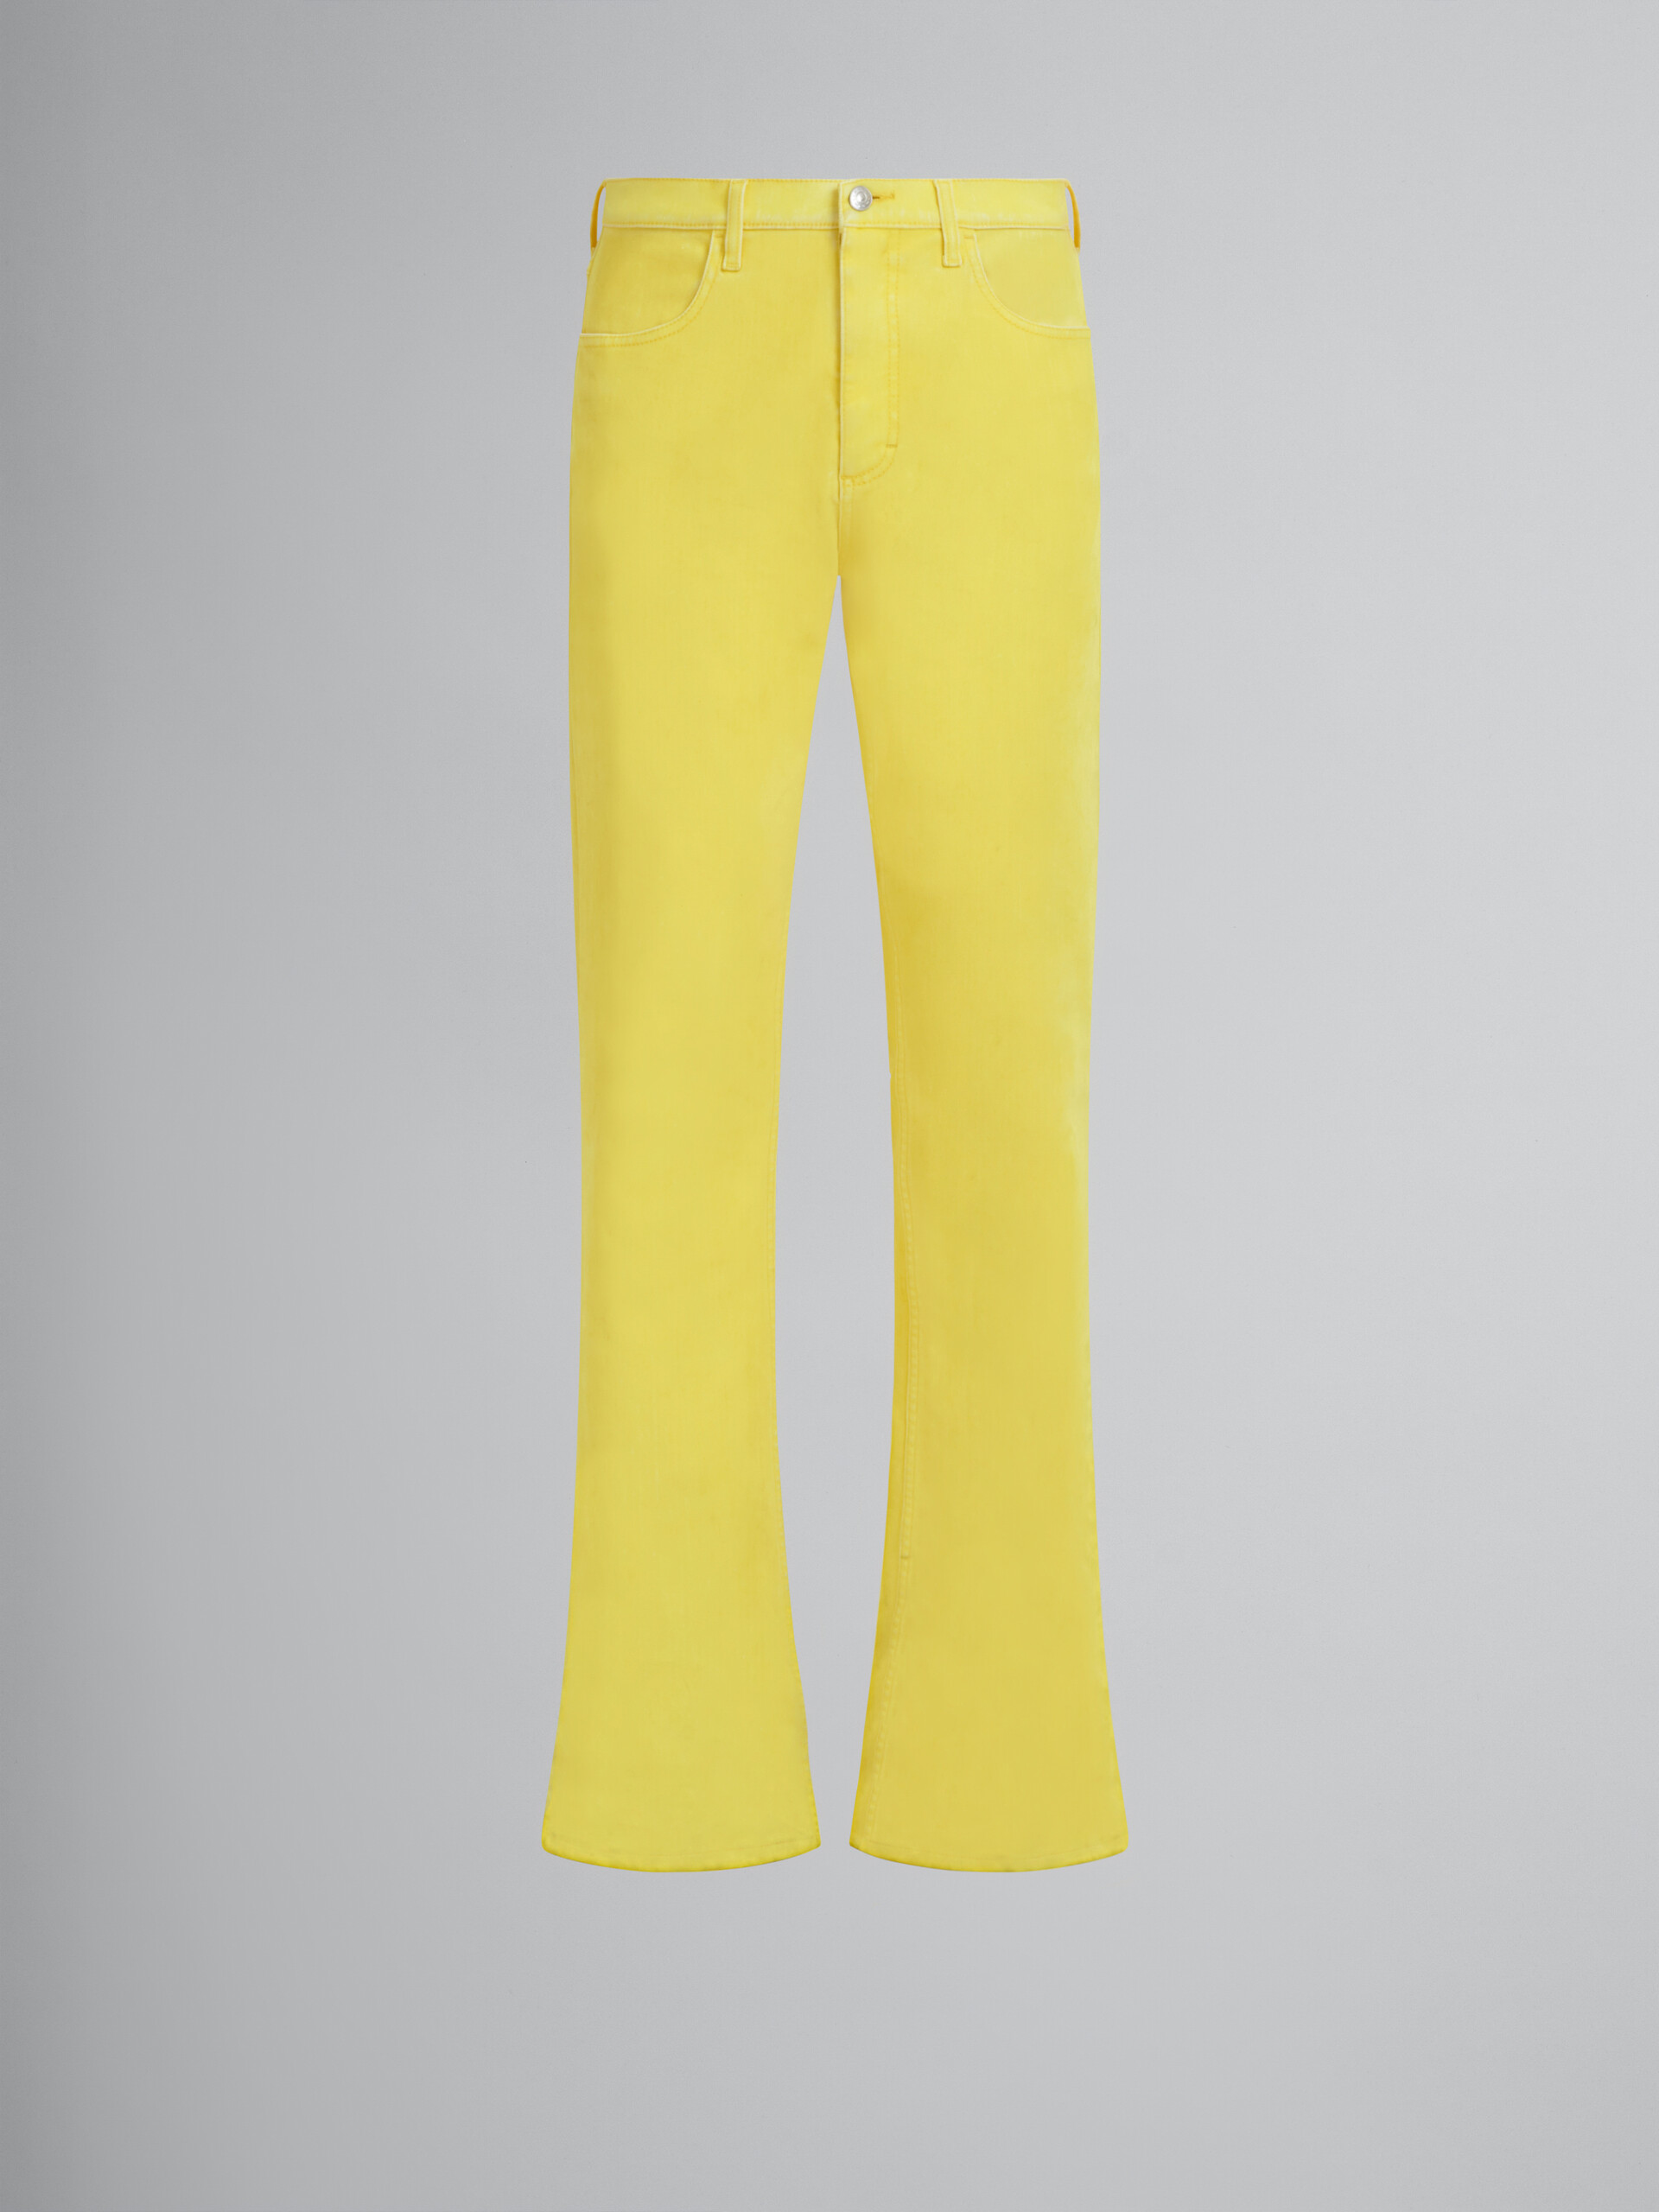 Yellow flared 5 pocket trousers in flocked denim - Pants - Image 1